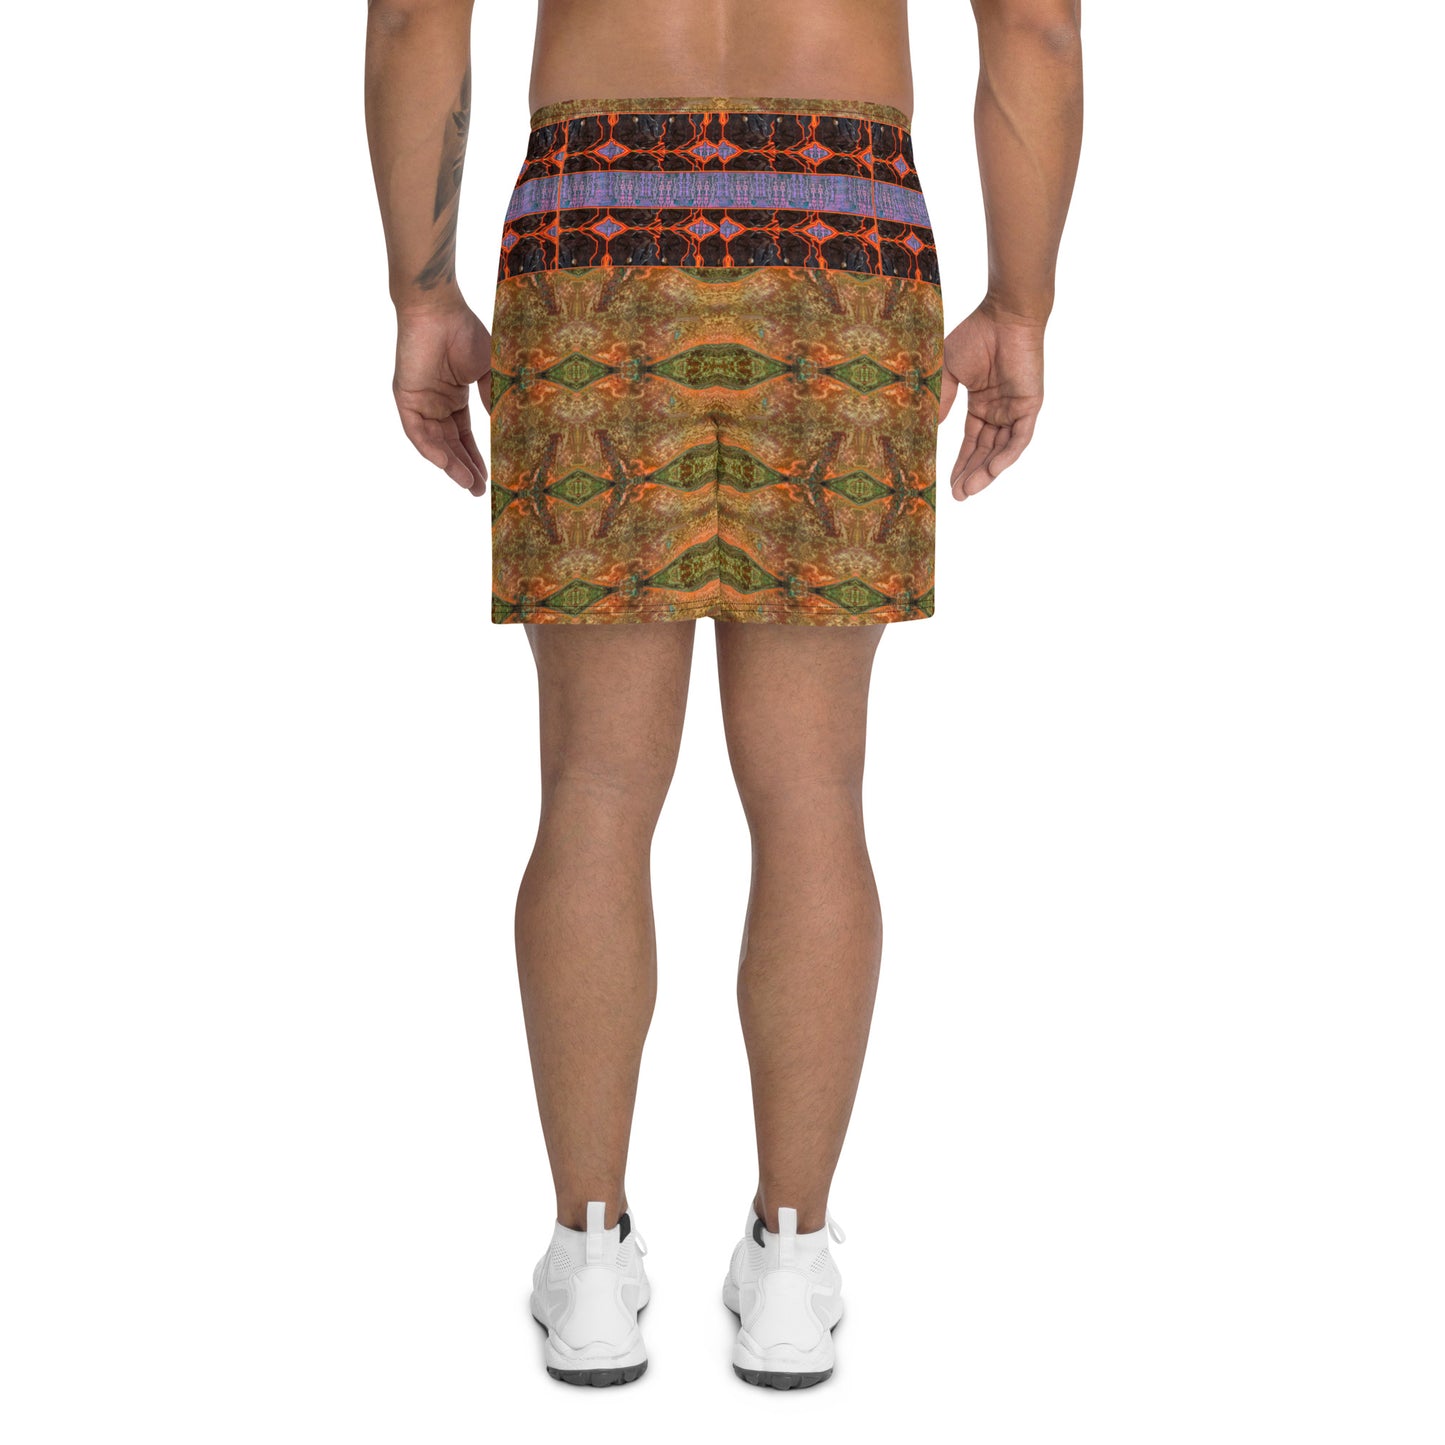 Athletic Long Shorts (His/They)(Tree Link Stripe) RJSTH@Fabric#6 RJSTHS2021 RJS